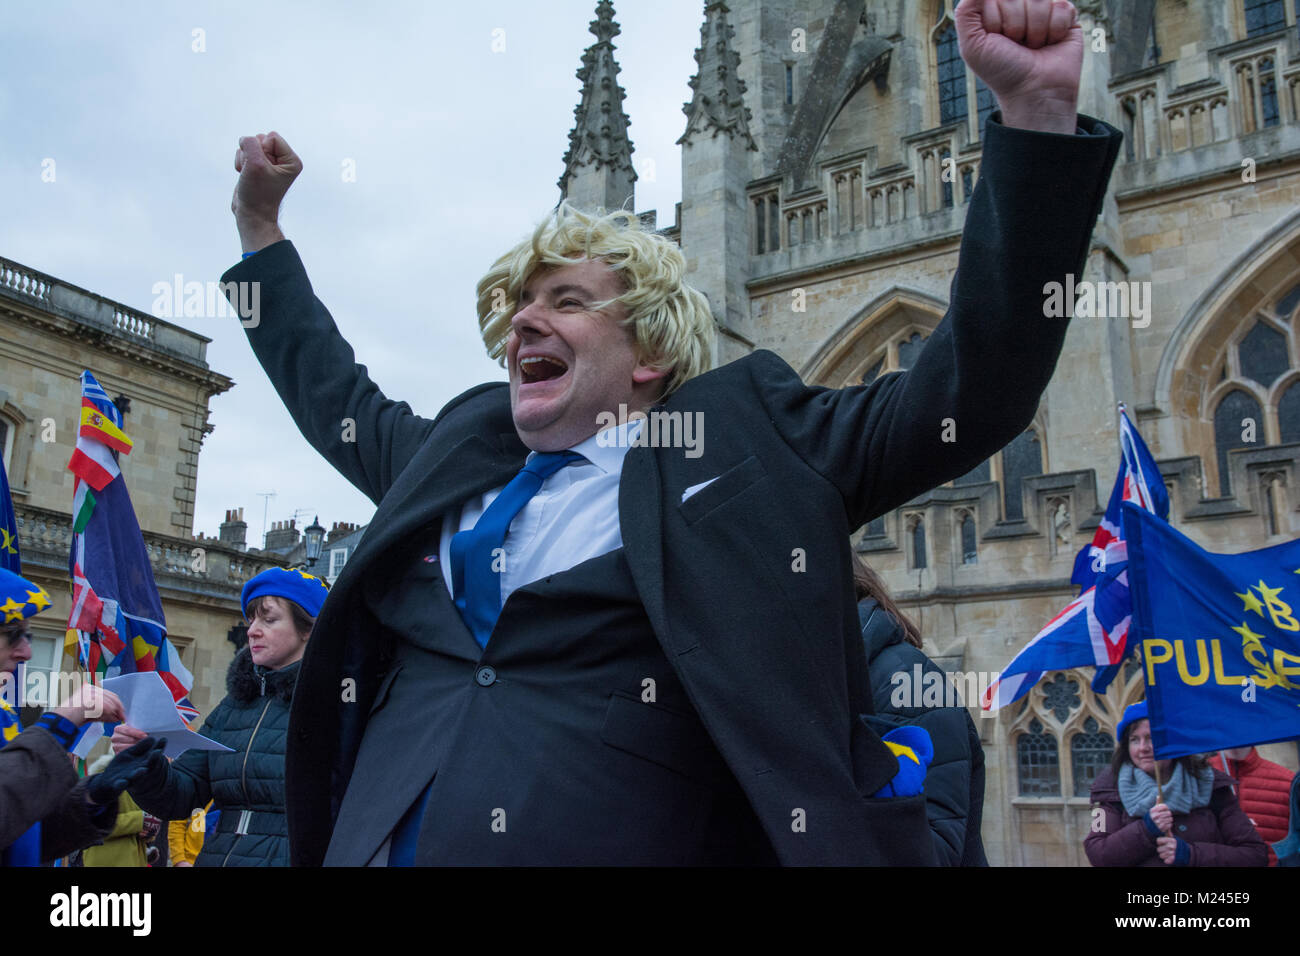 Bath, UK, 4th February 2018. Bath Pulse for Europe, A youth lead anti Brexit event in Bath City centre featuring theatre, music, speeches and a march around the streets of Bath. Organised by Bath for Europe. Credit: Stephen Bell/Alamy Live News Stock Photo